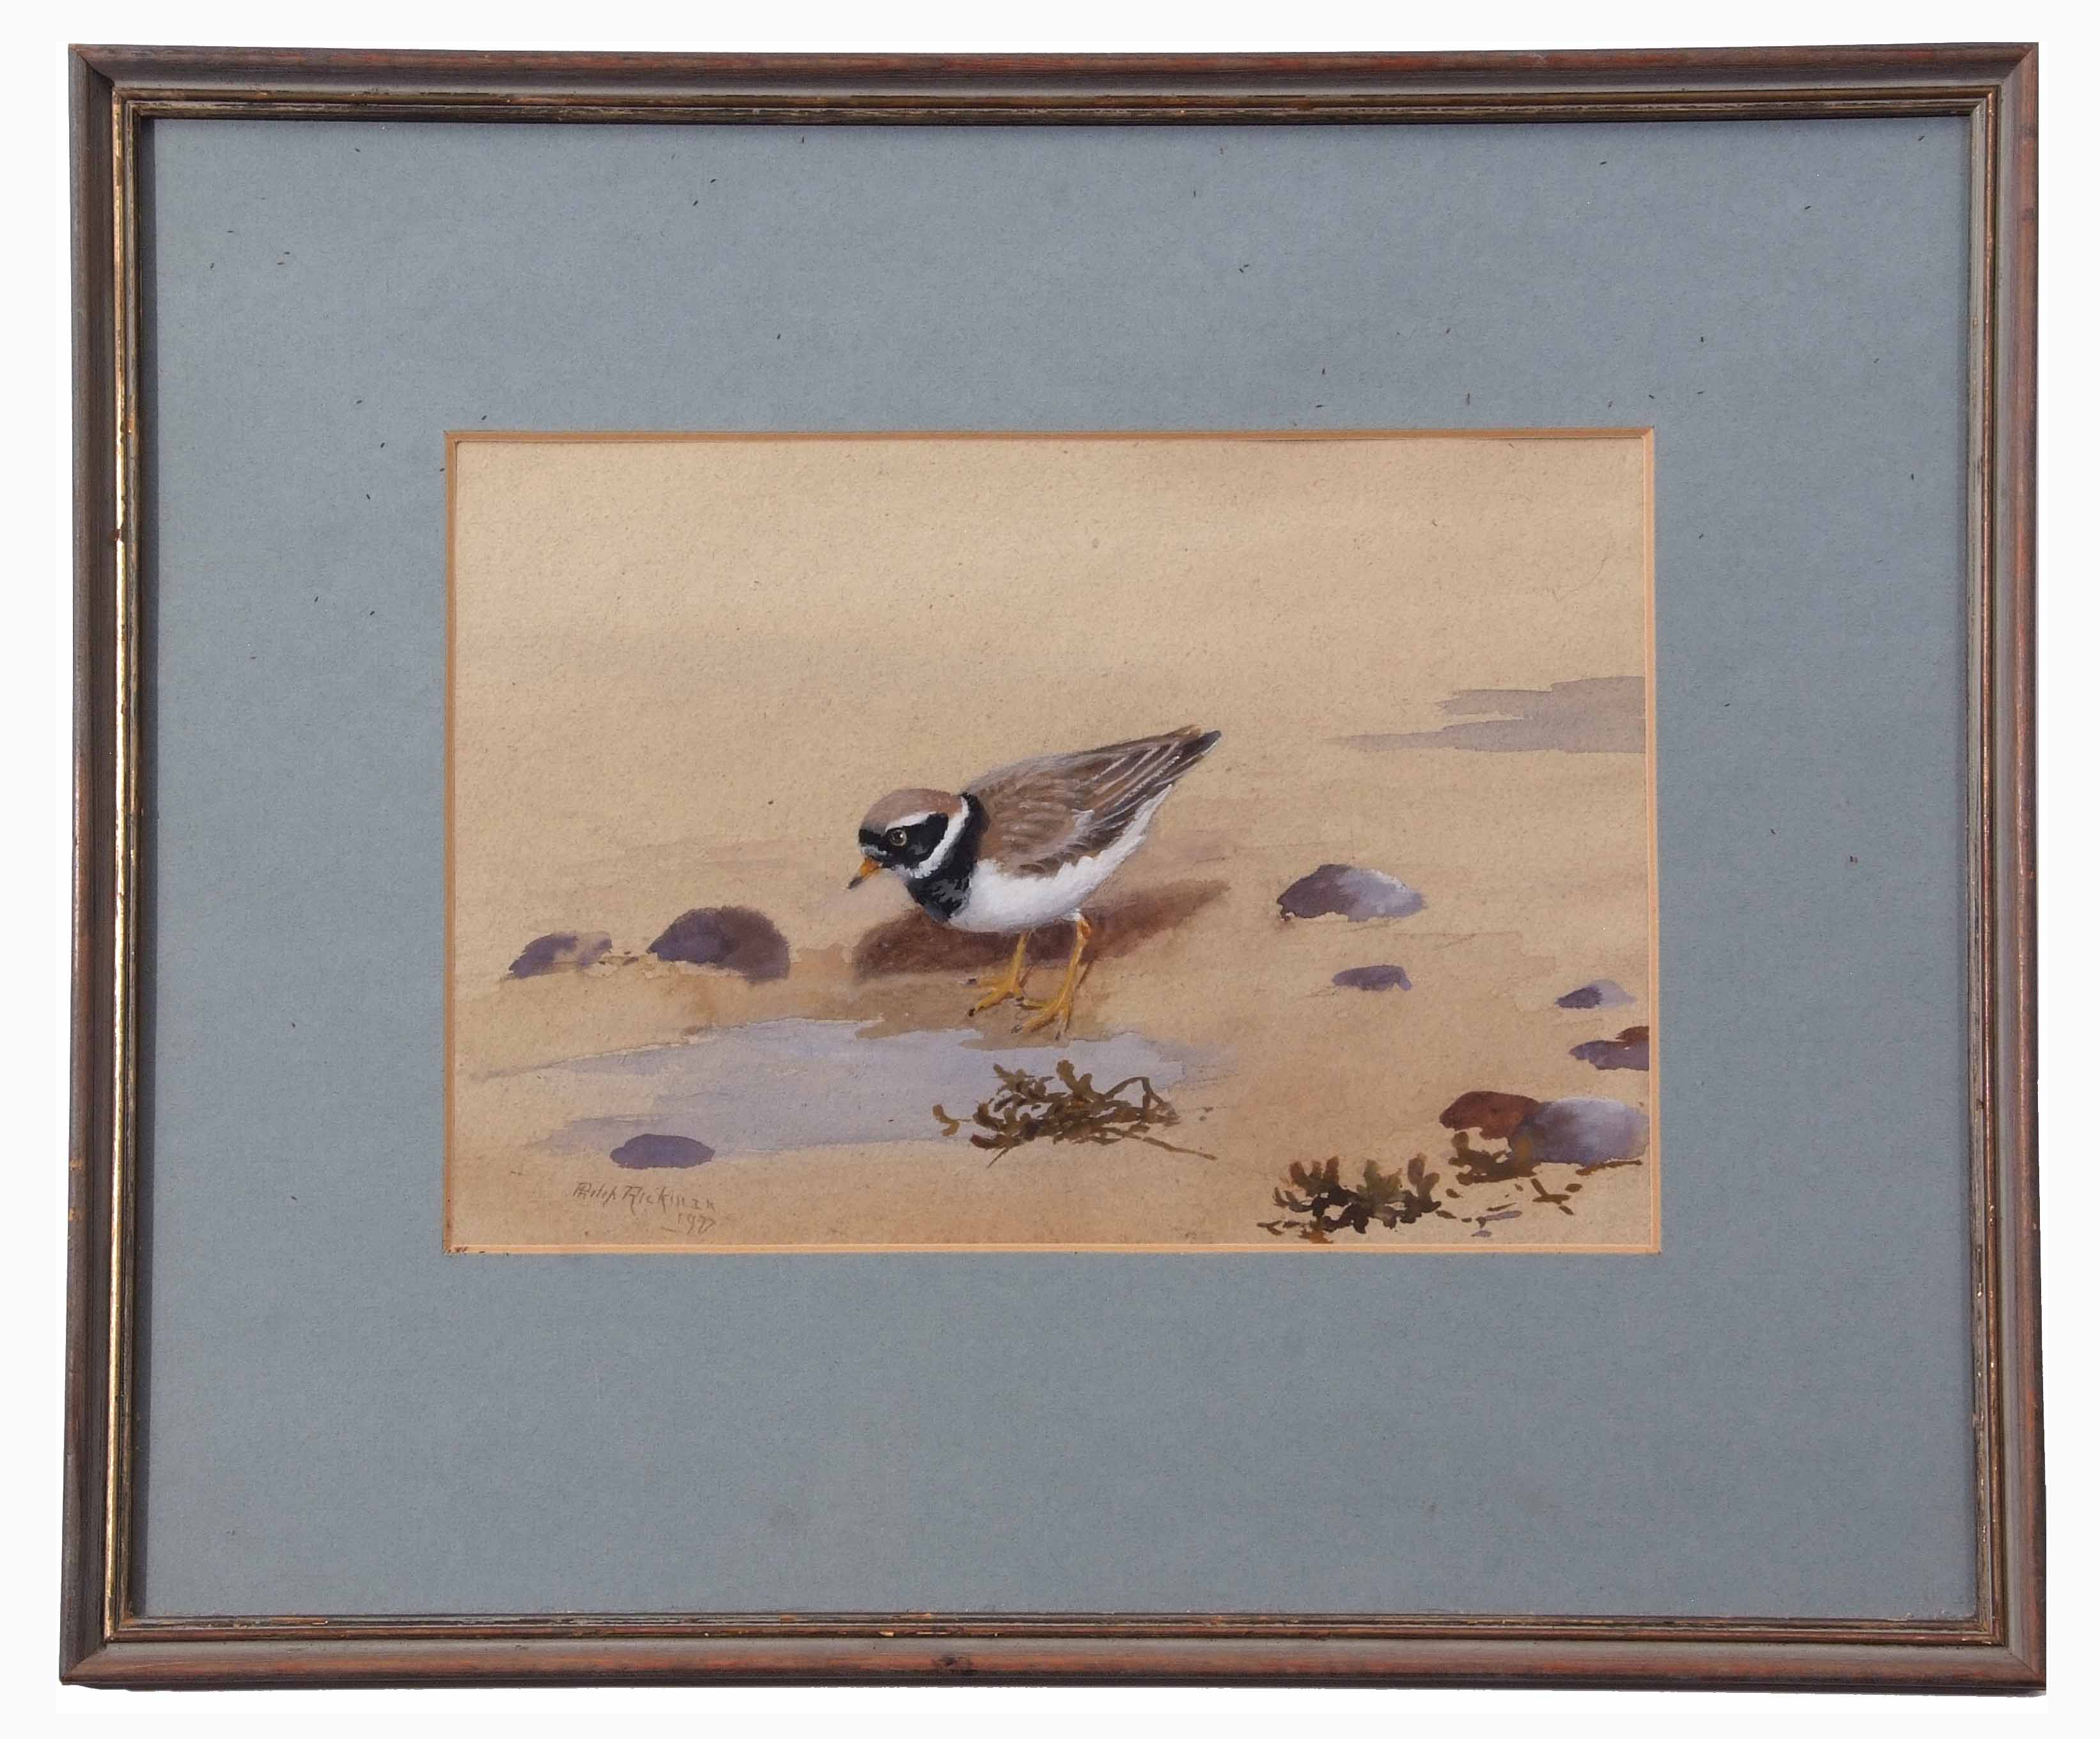 AR Philip Rickman (1891-1982), "Ringed Plover", watercolour, signed and dated 1977 lower right, 18 x - Image 2 of 2